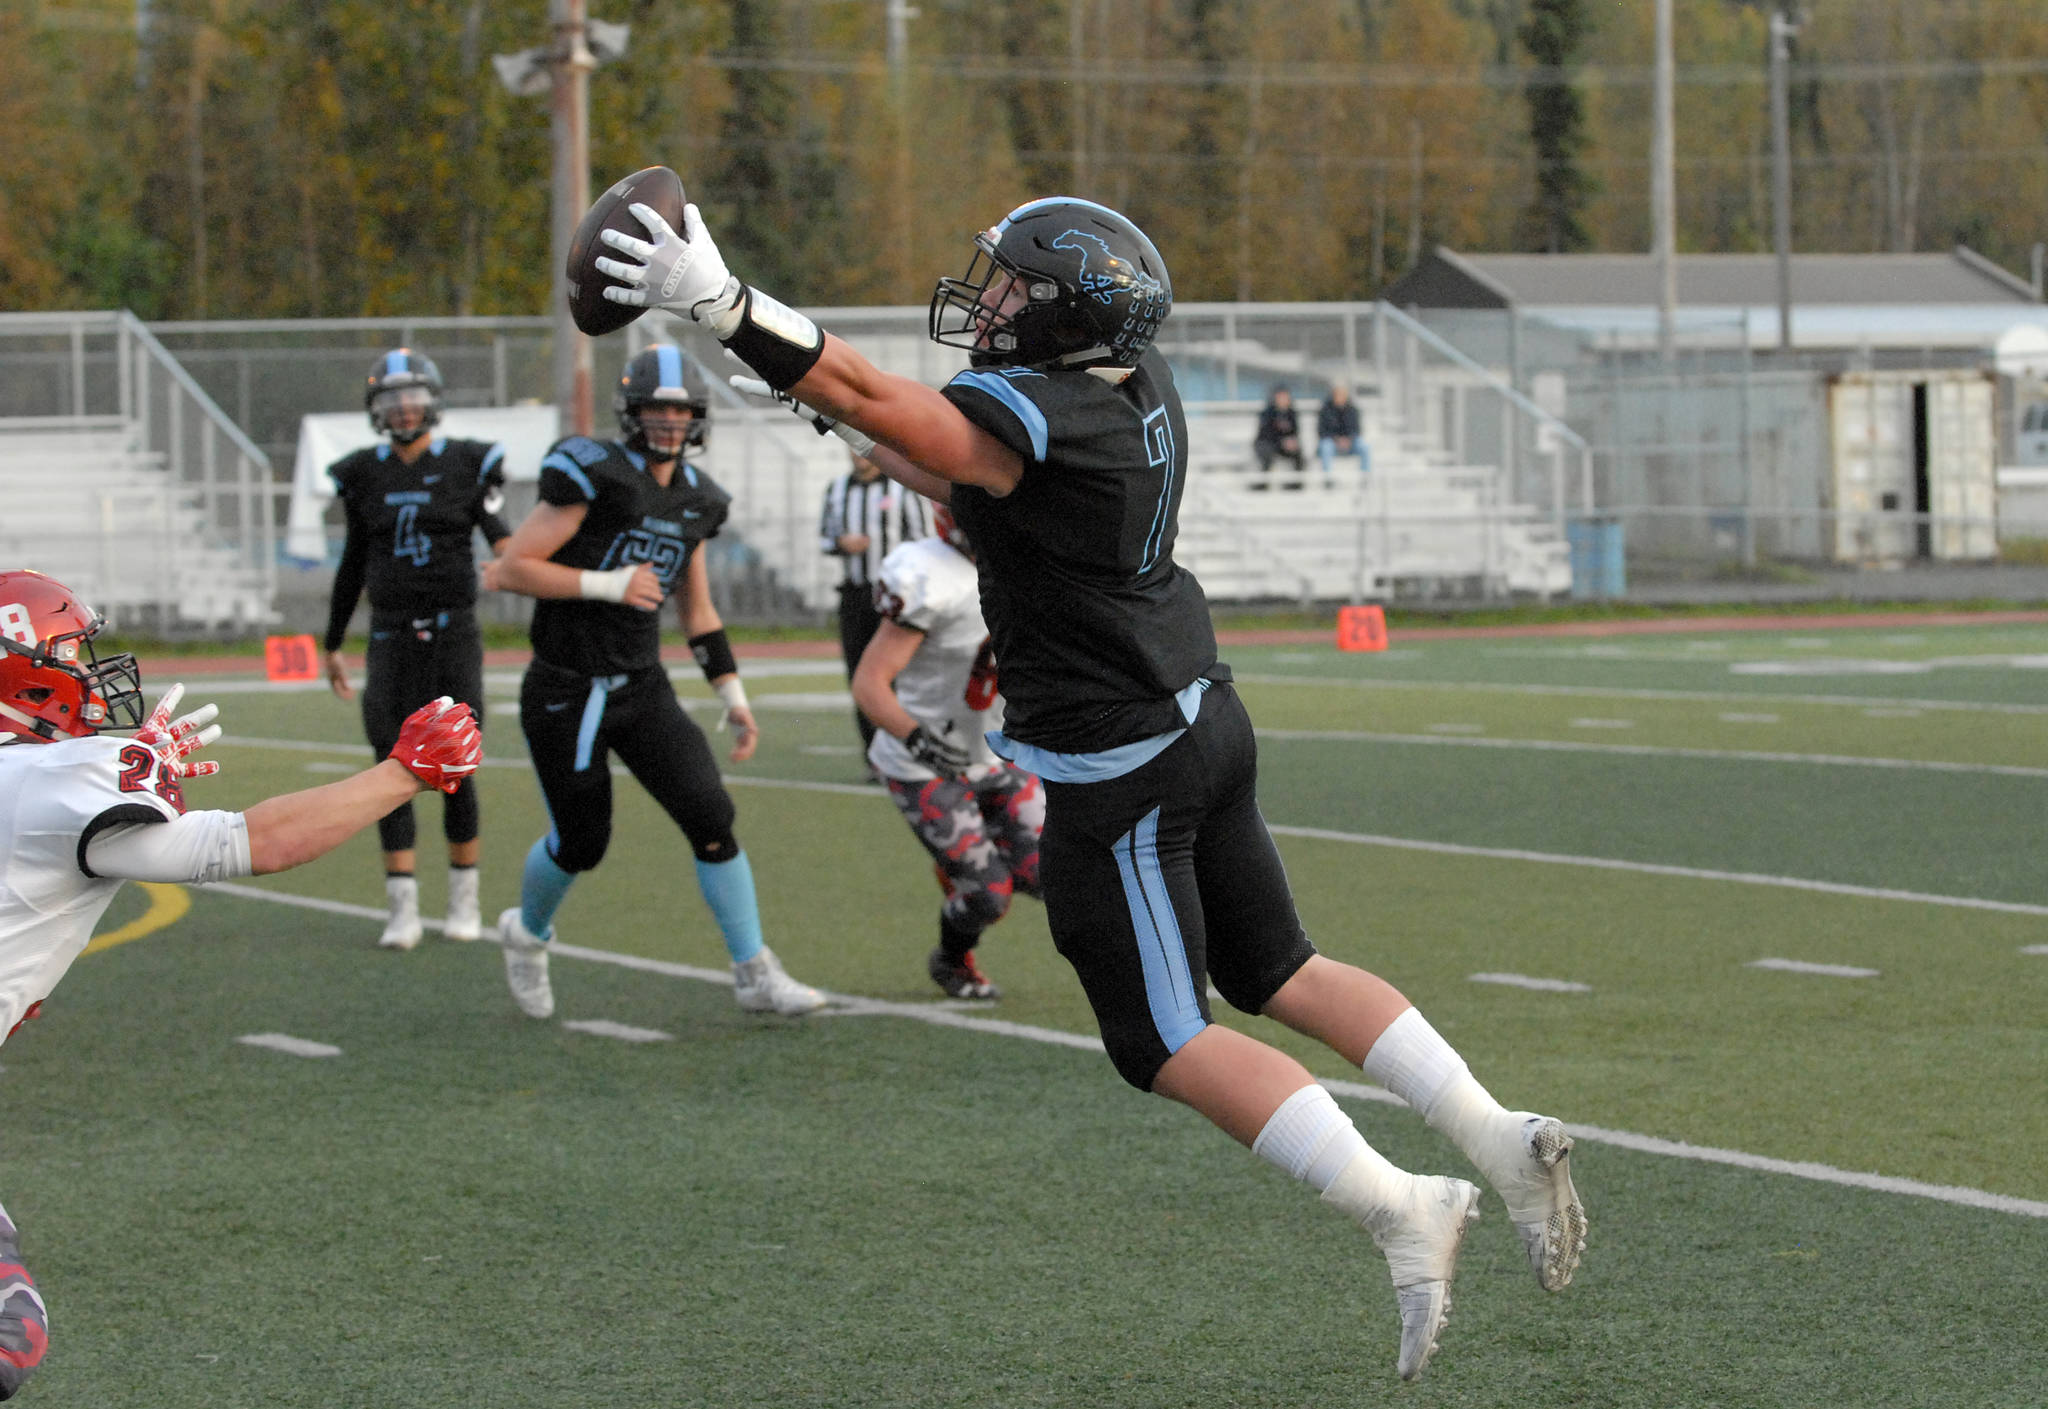 Chugiak’s Derryk Snell leaps to catch a pass during Chugiak’s 48-0 nonconference high school football win over Kenai on Friday, Sept. 15, 2017 at Tom Huffer Sr. Stadium in Chugiak. (Star photo by Matt Tunseth)